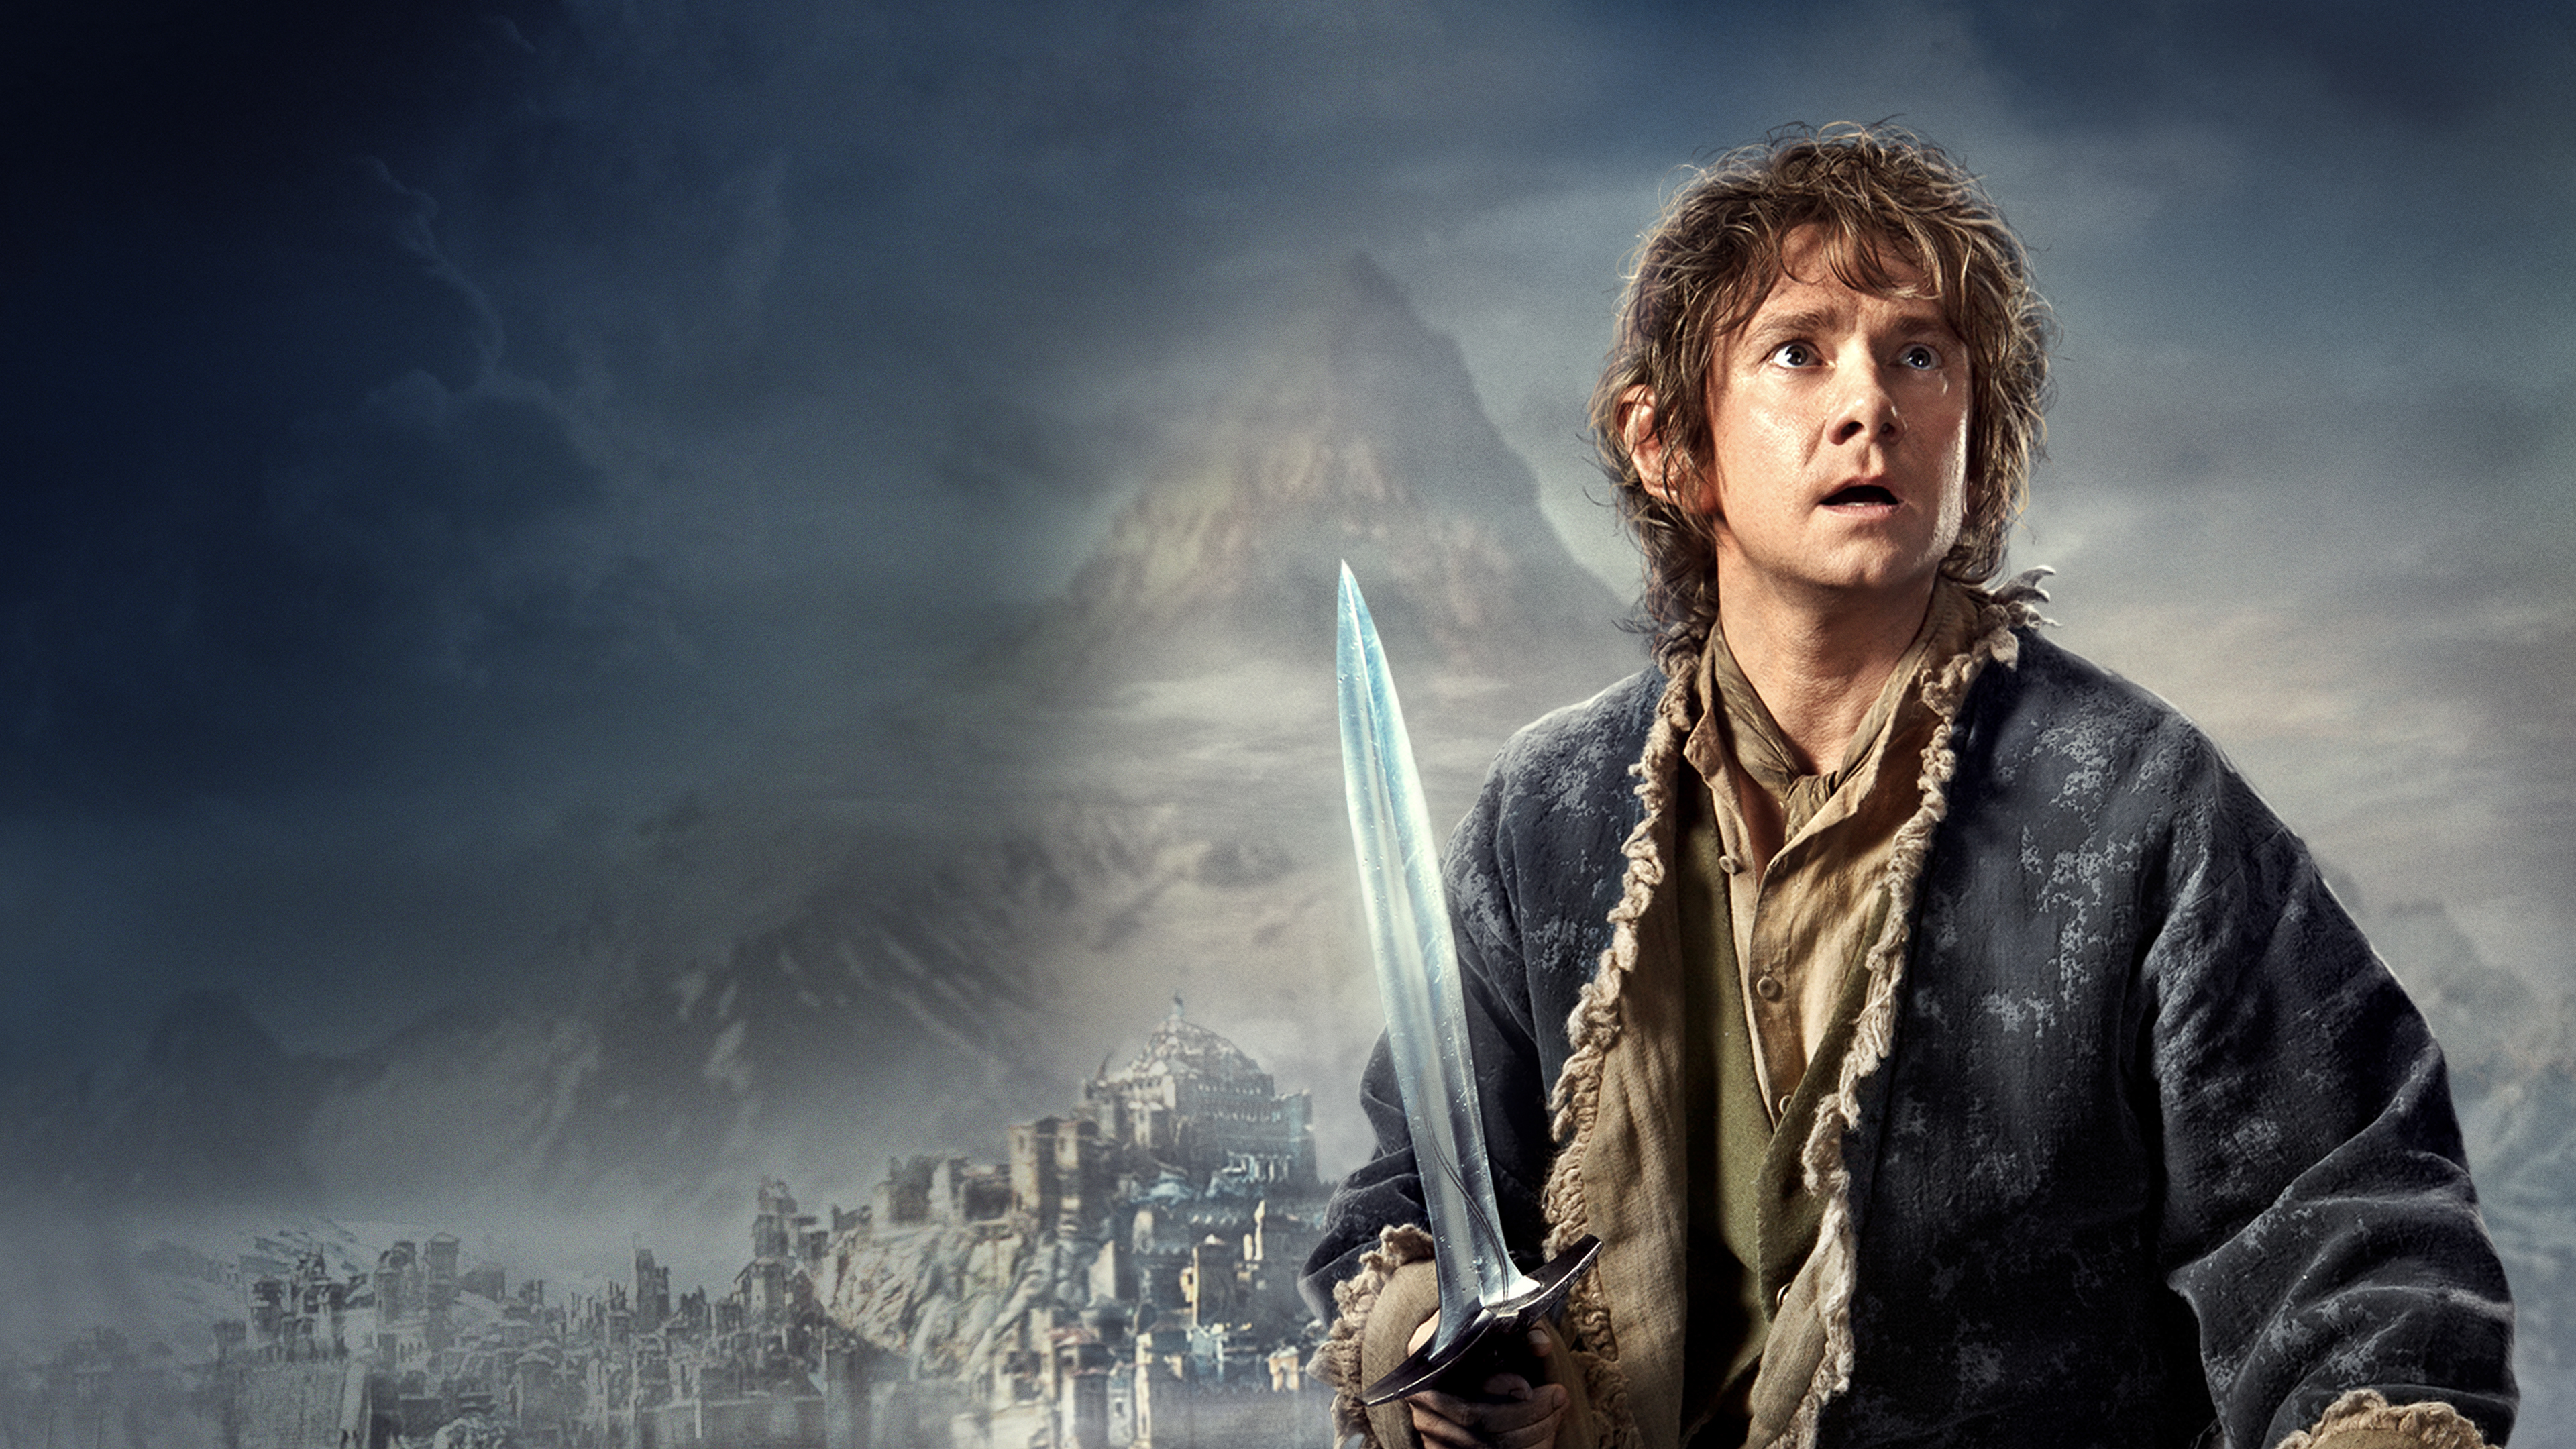 The Hobbit: The Desolation of Smaug 4k Ultra HD Wallpaper